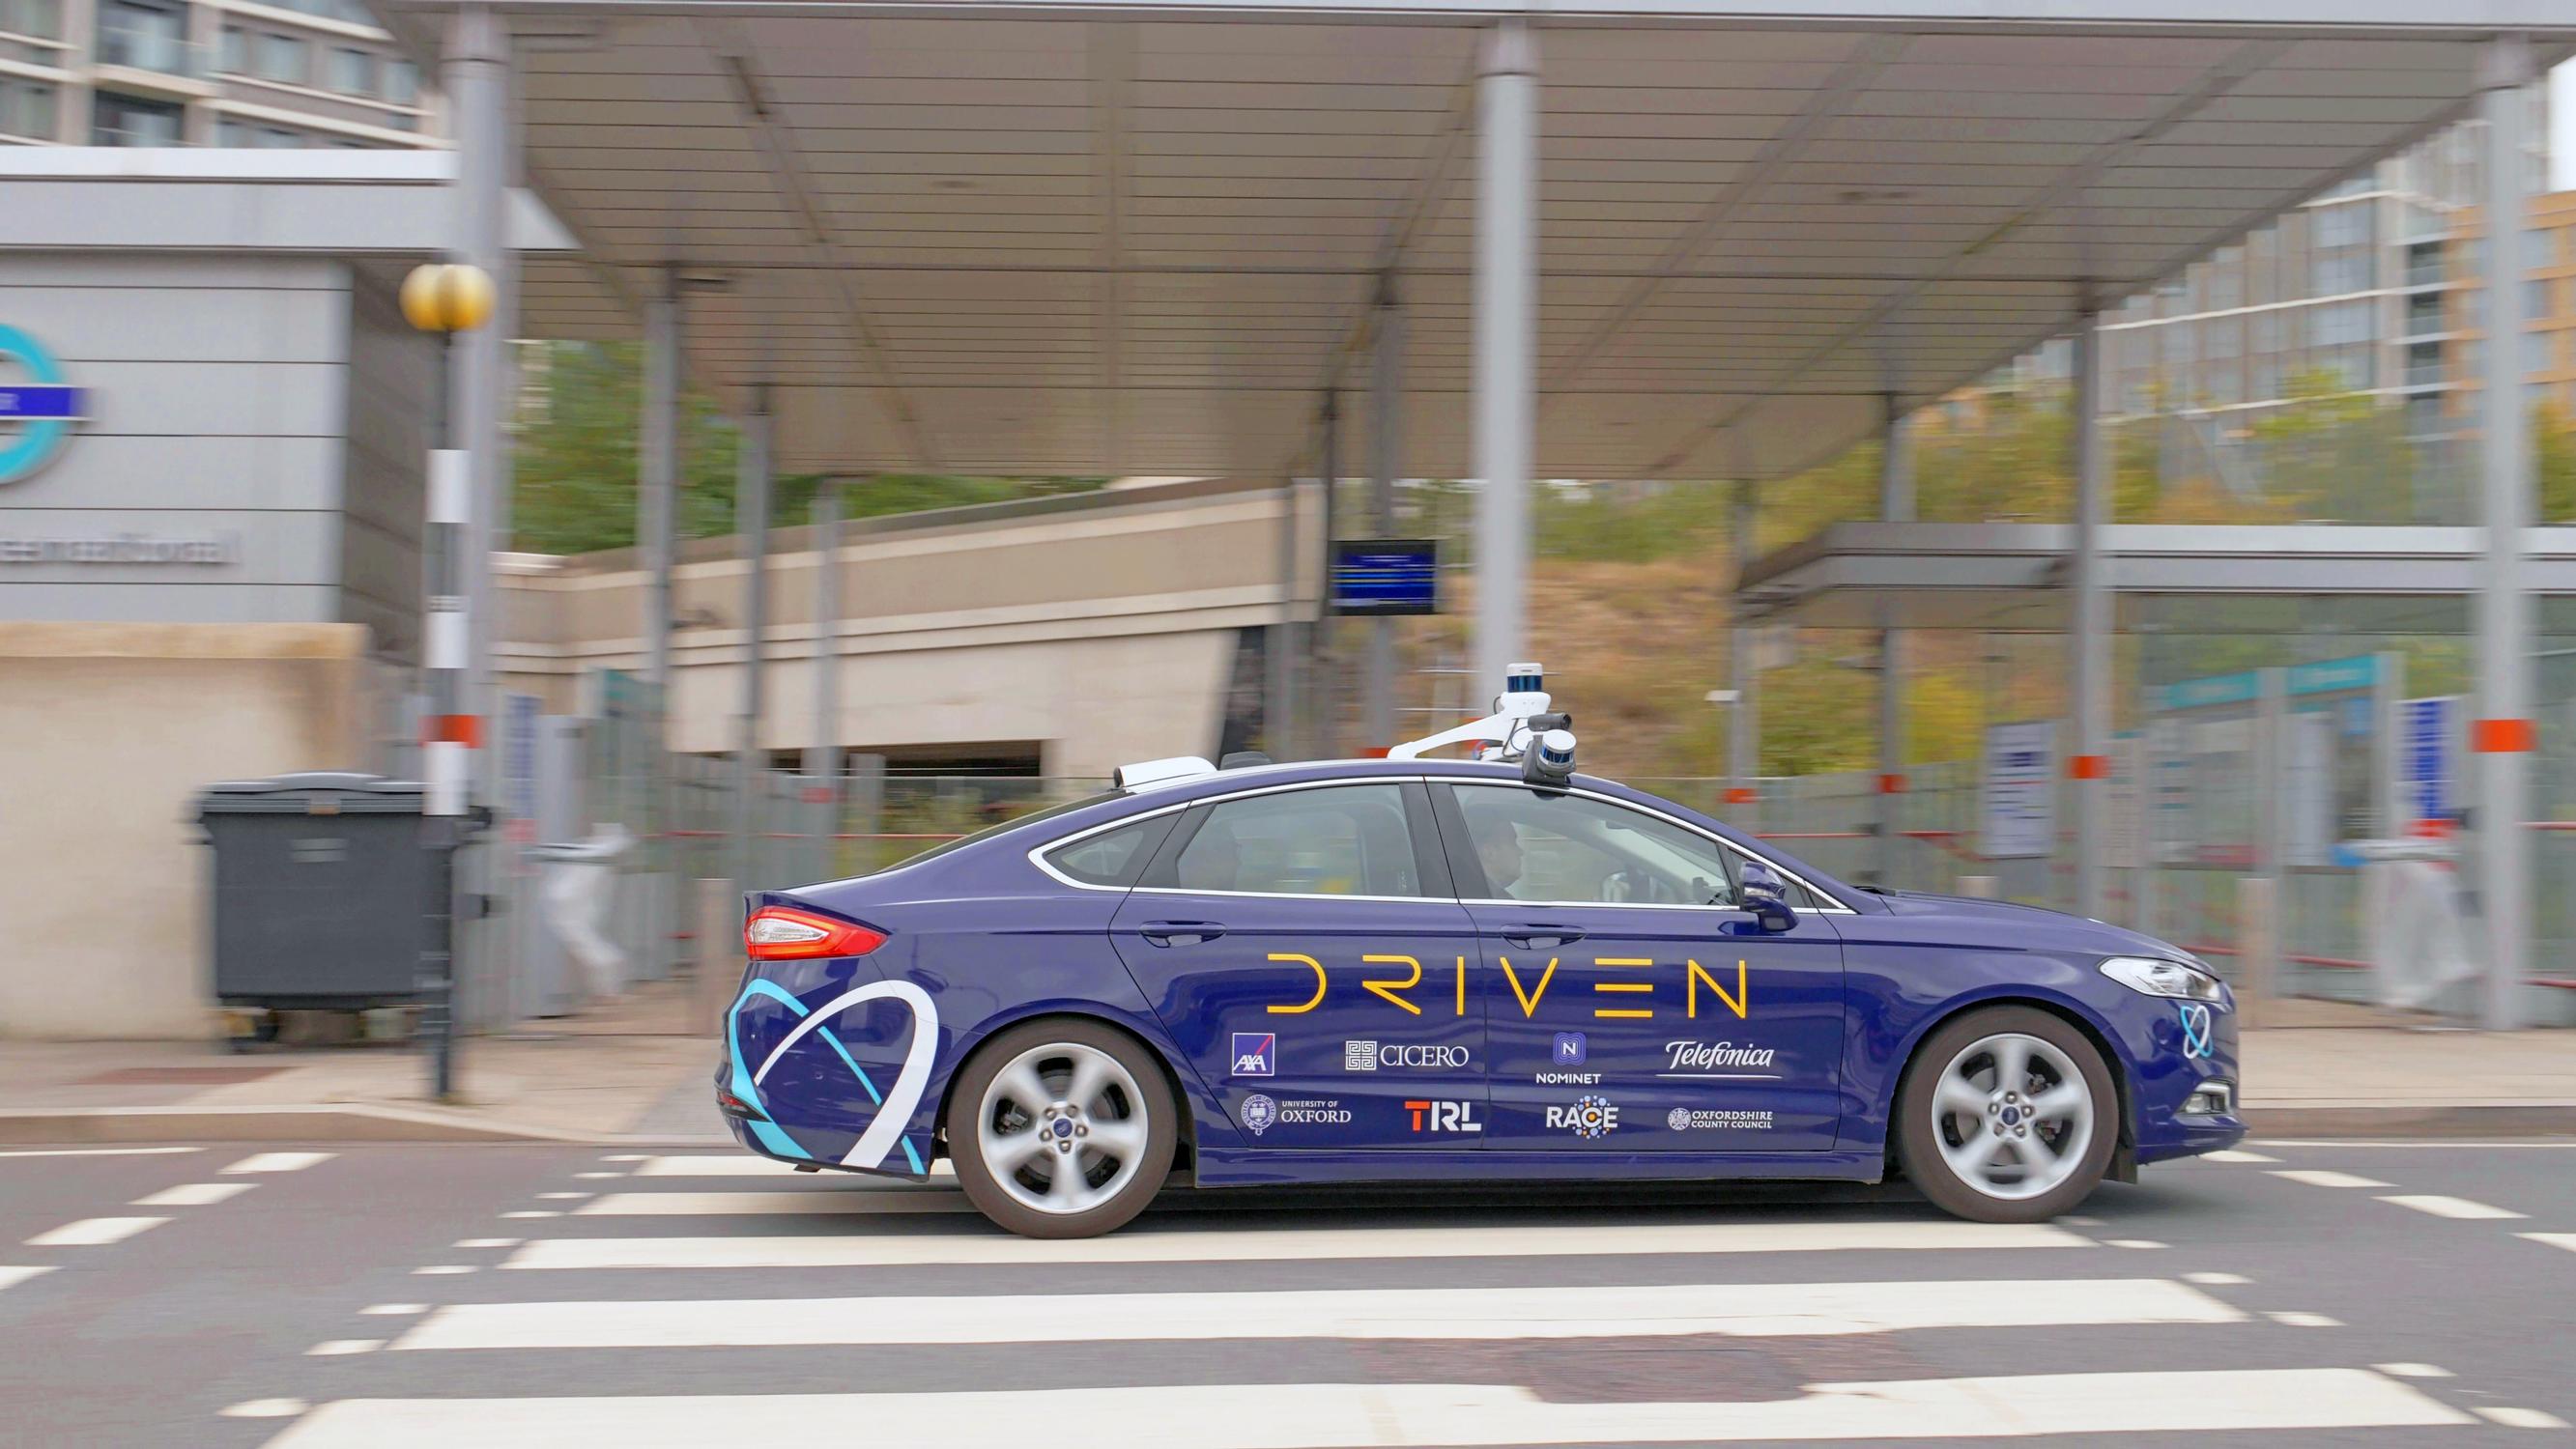 One of the four Oxbotica self-driving cars that took park in a demonstration around Stratford